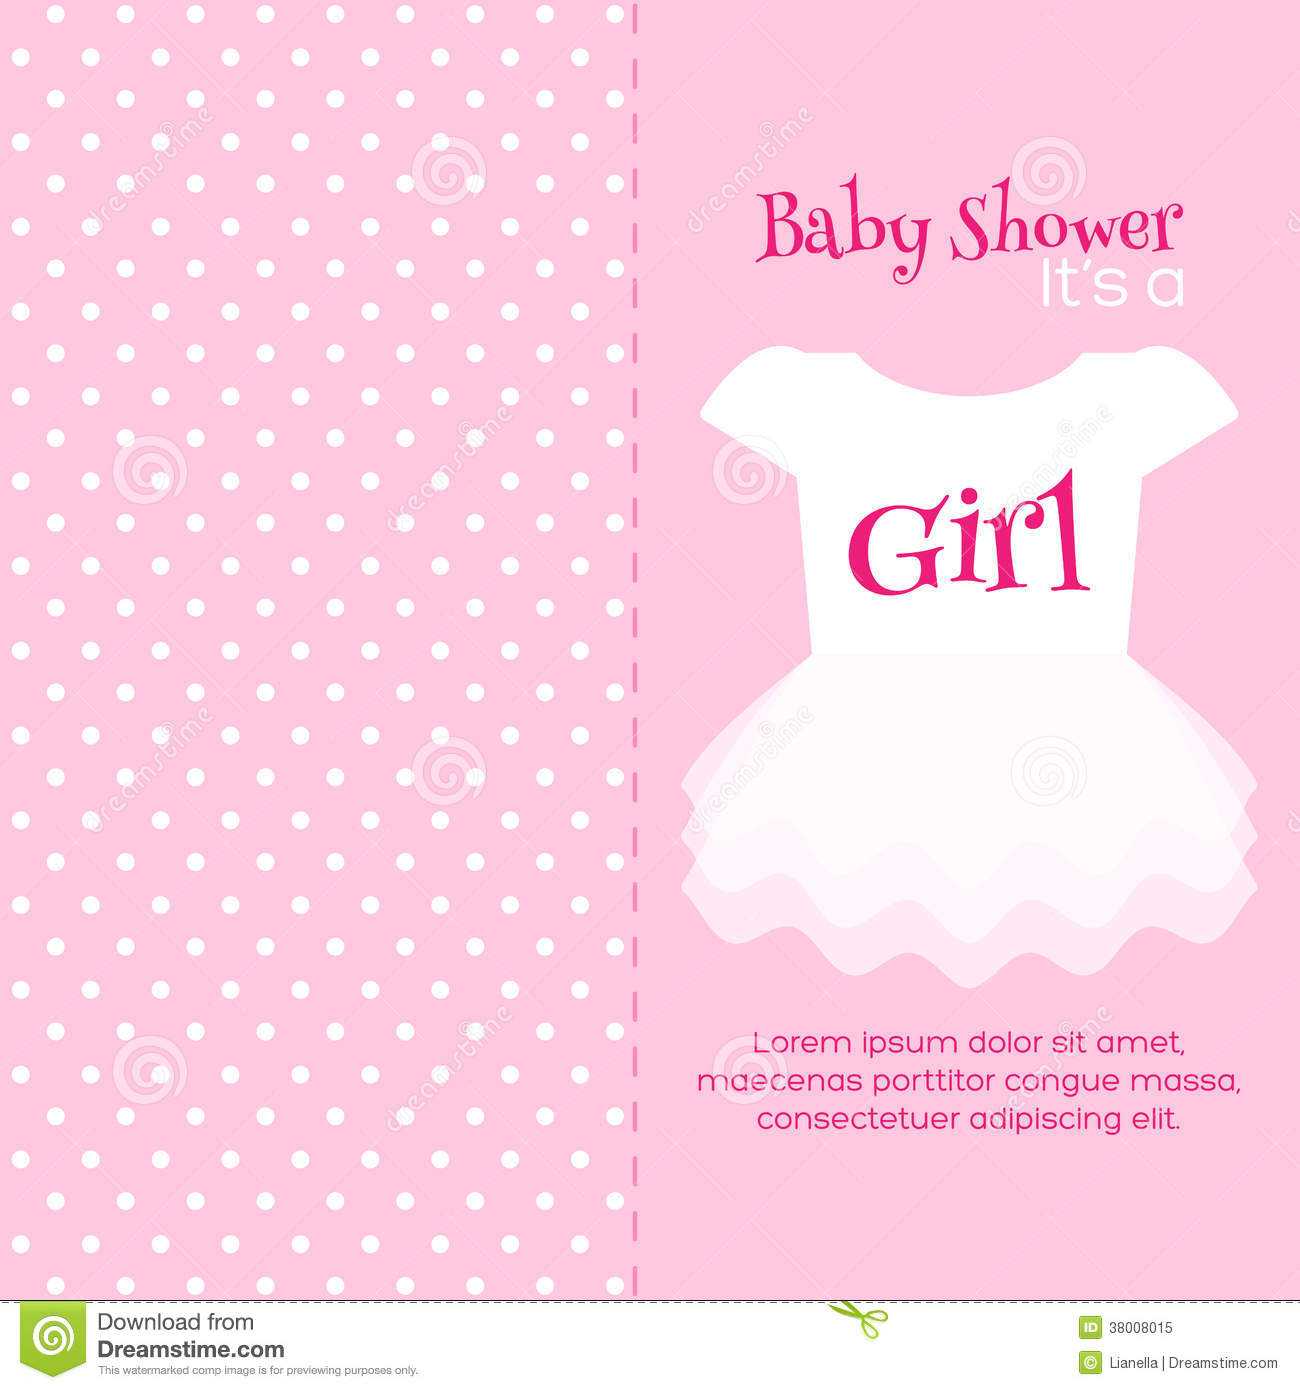 Downloadable Baby Shower Invitation Templates – Dalep In Free Baby Shower Invitation Templates Microsoft Word